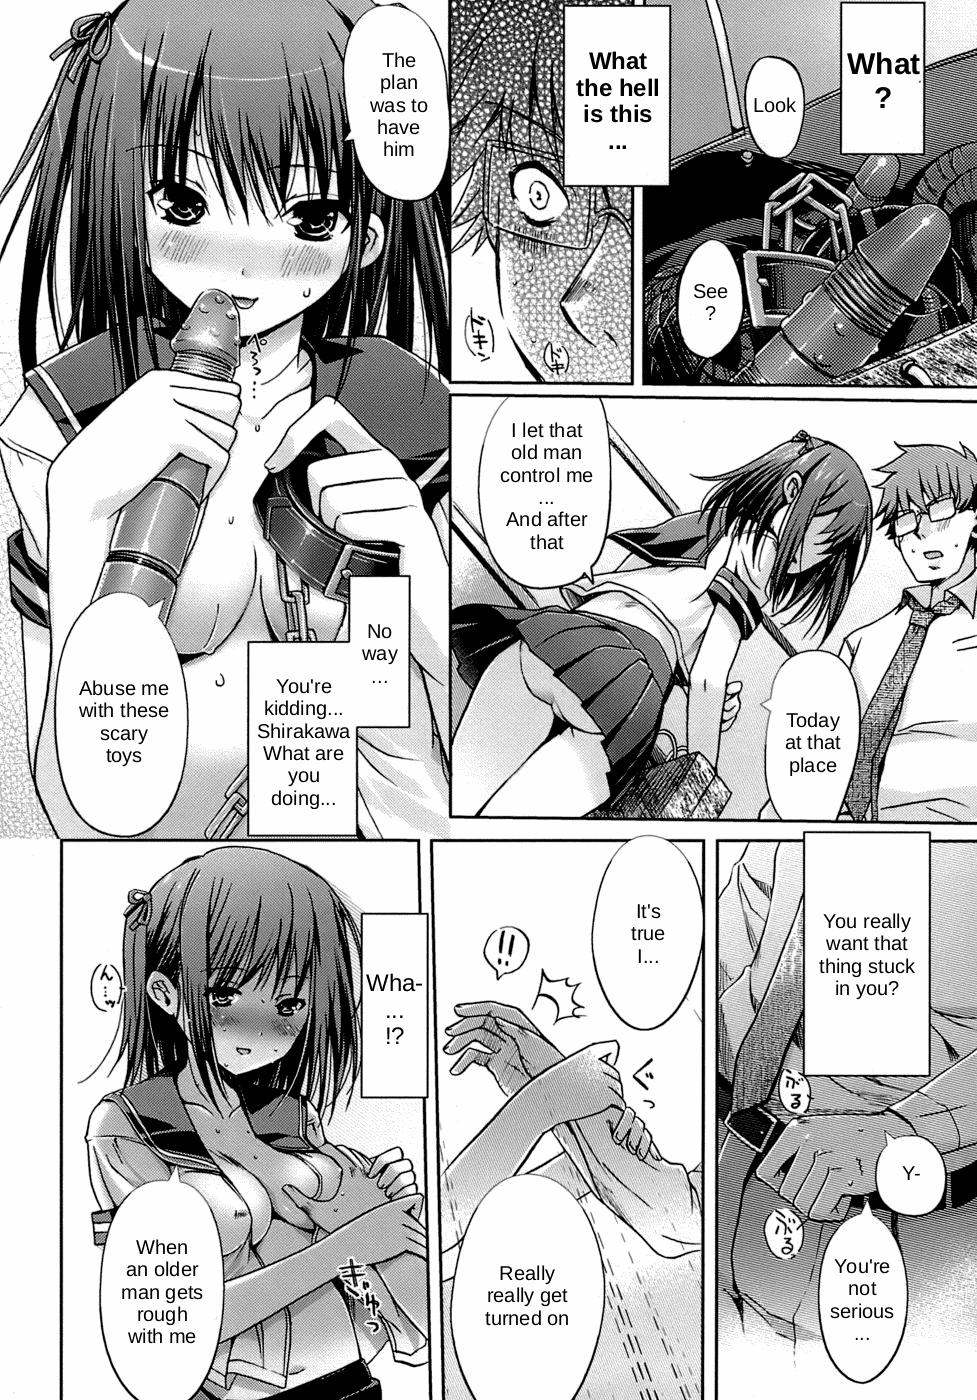 Prostitute Yuutousei | Honors Student Hardcore Porn - Page 4